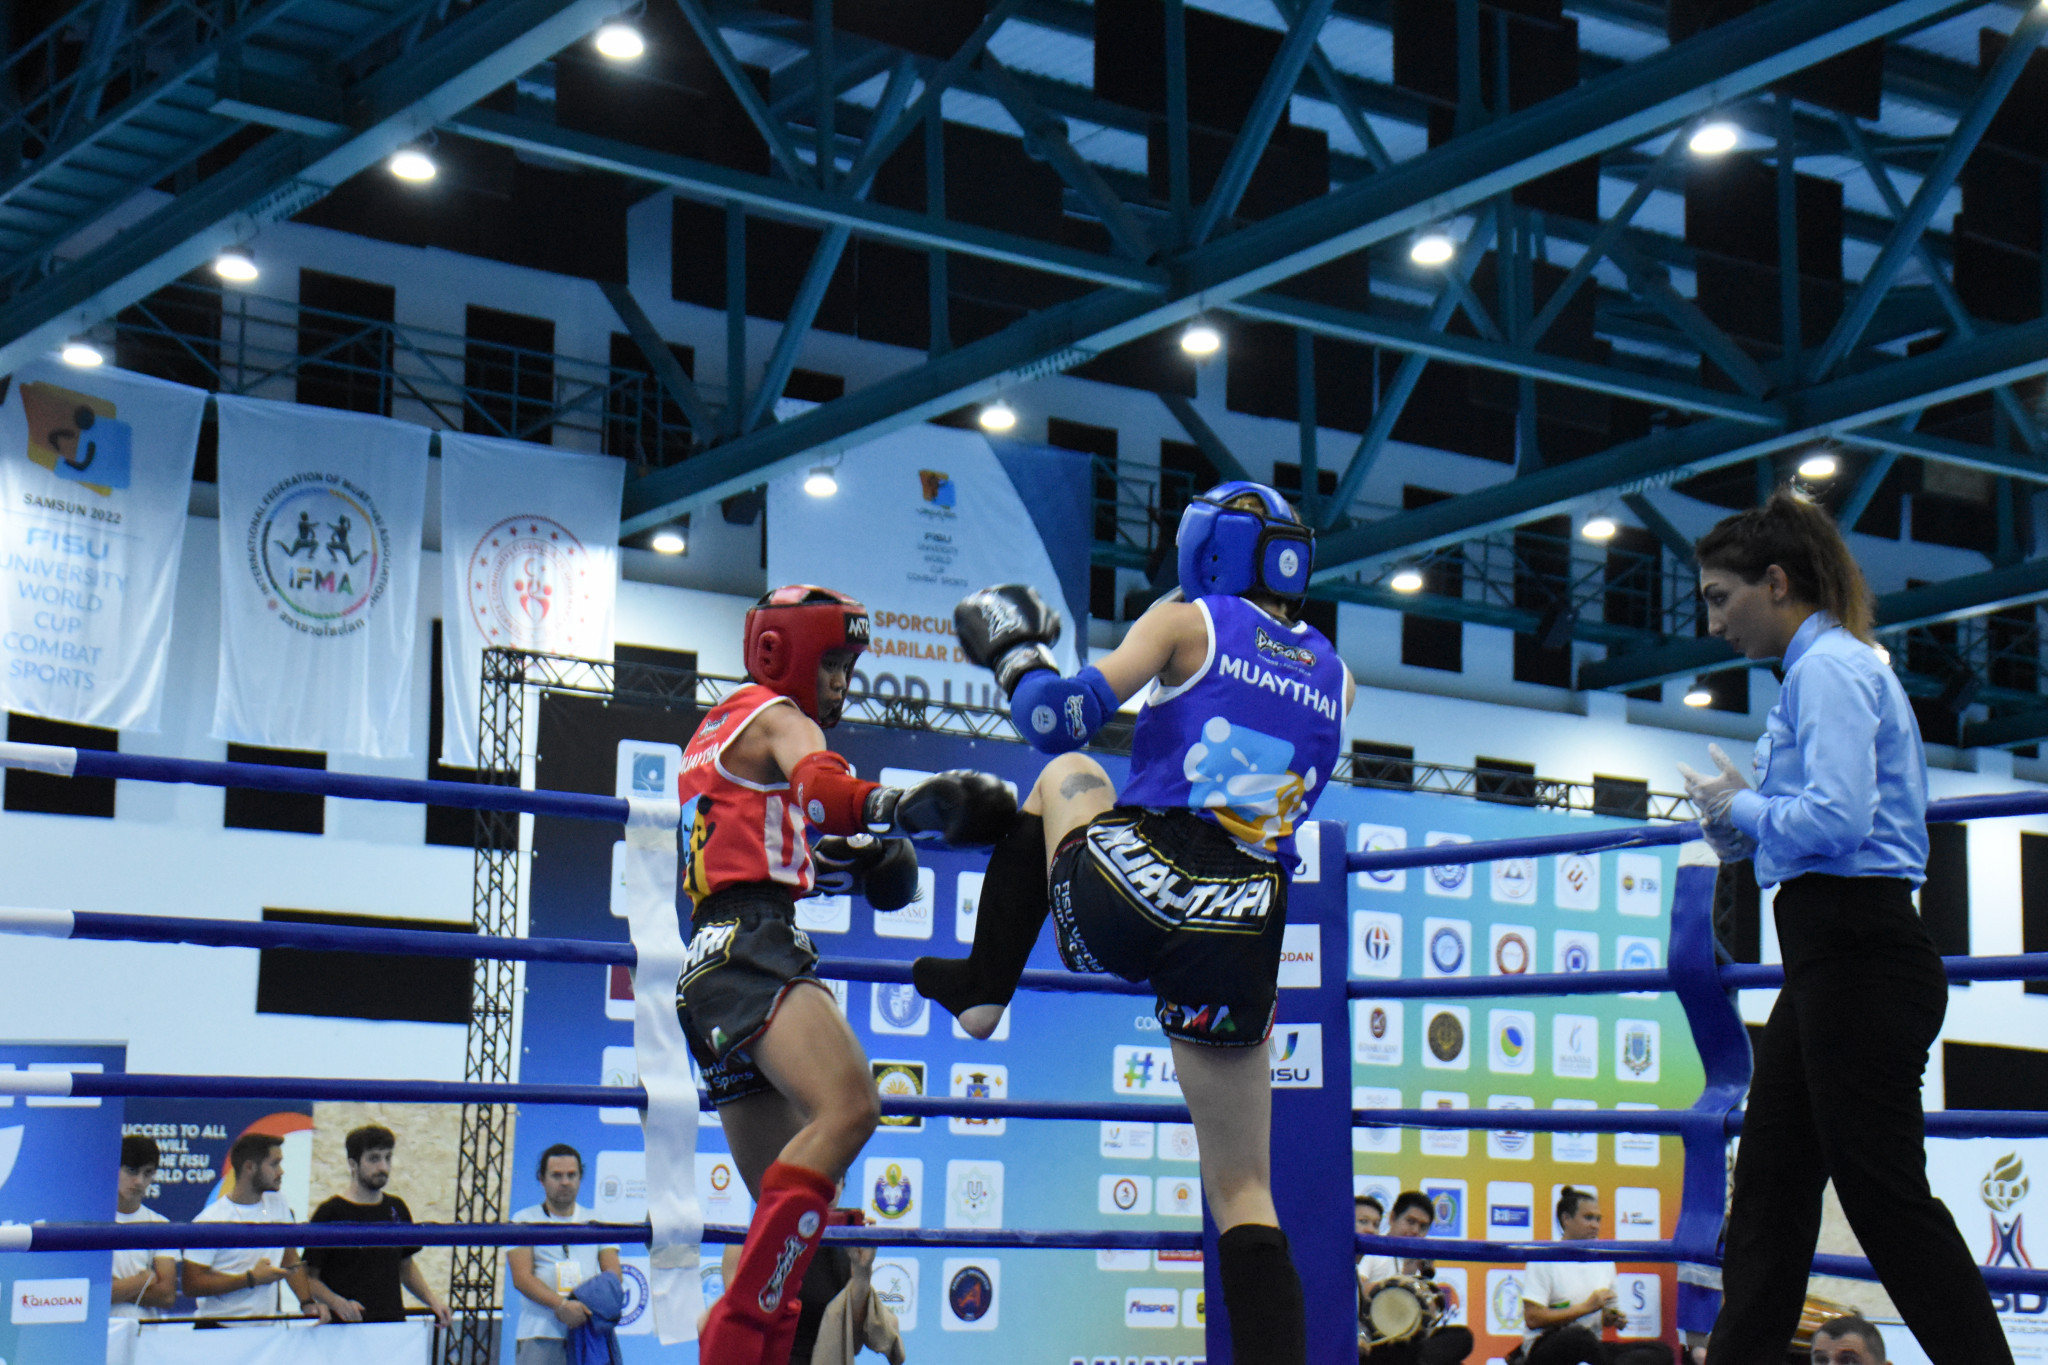 Muaythai fighters can kick and punch their opponents ©FISU